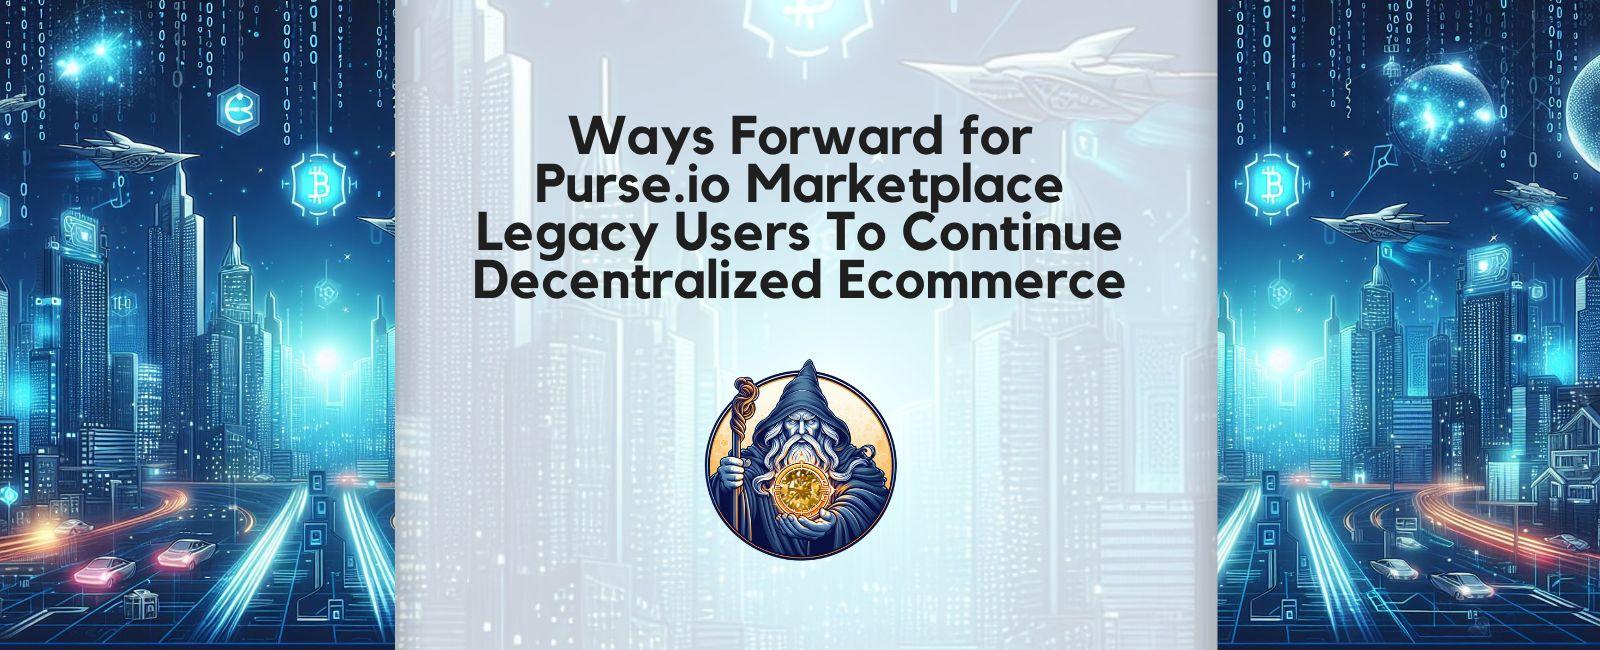 Ways Forward for Purse.io Marketplace Legacy Users To Continue decentralized Ecommerce